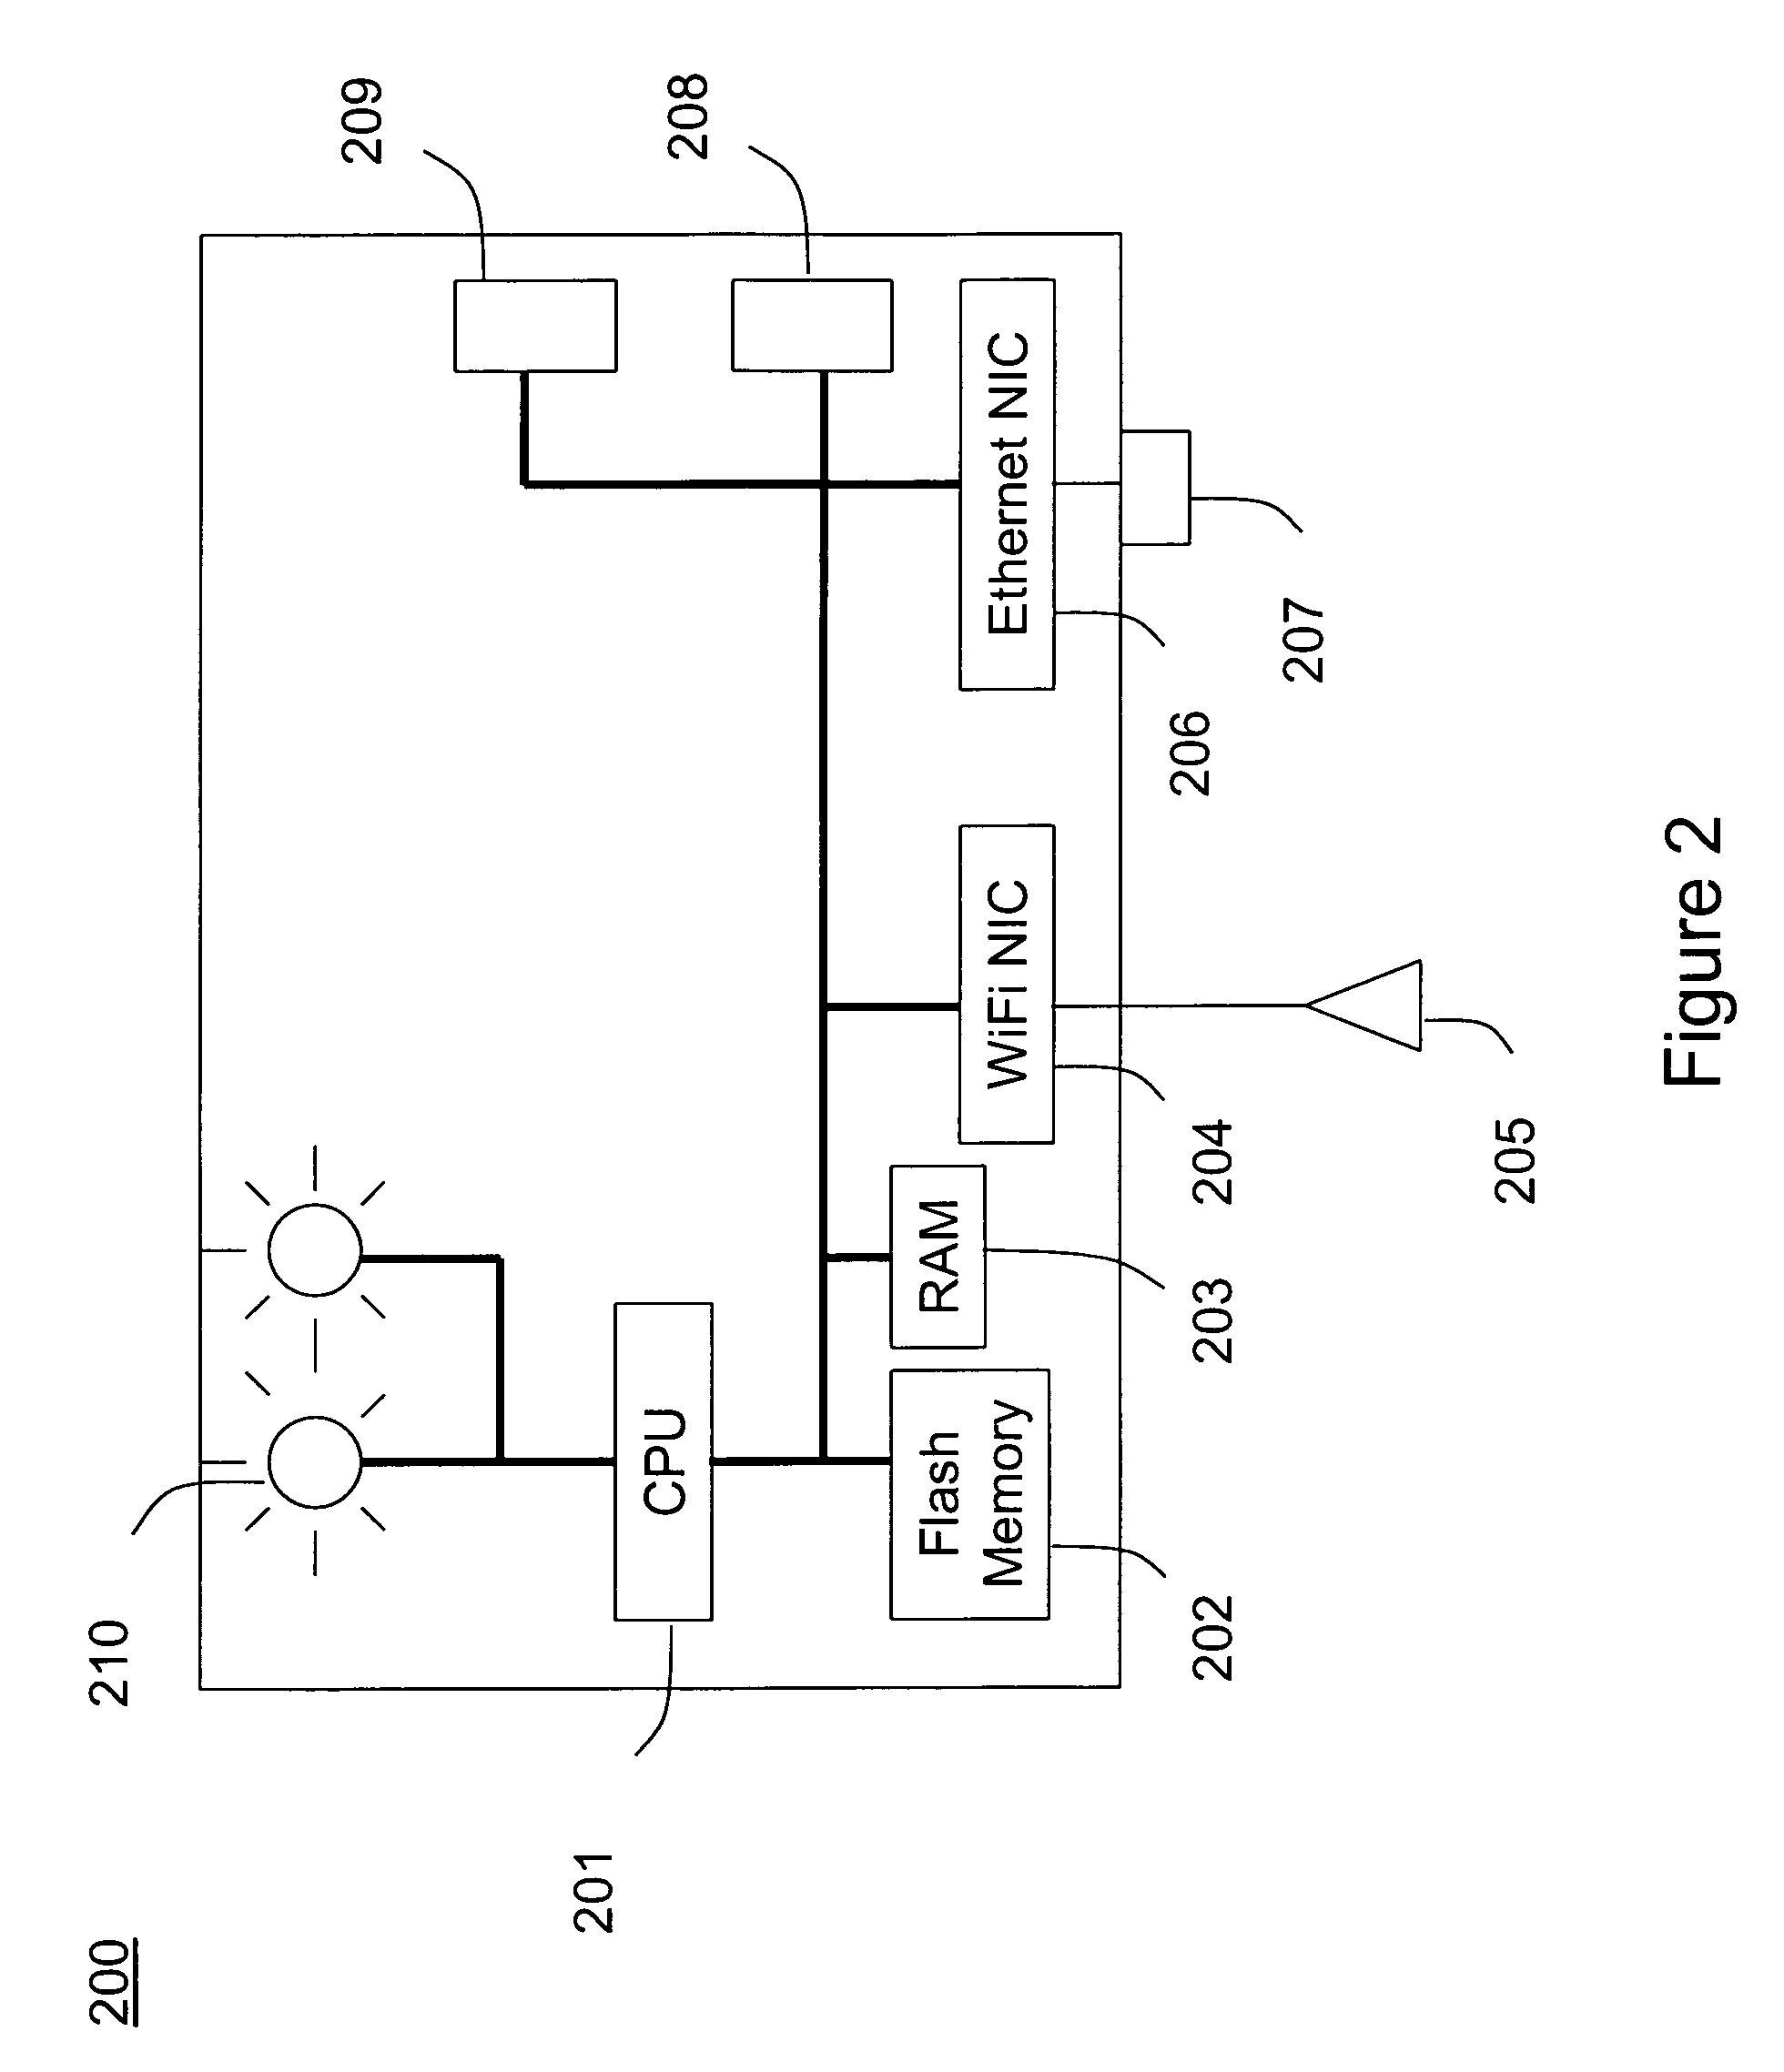 Method and system for disrupting undesirable wireless communication of devices in computer networks